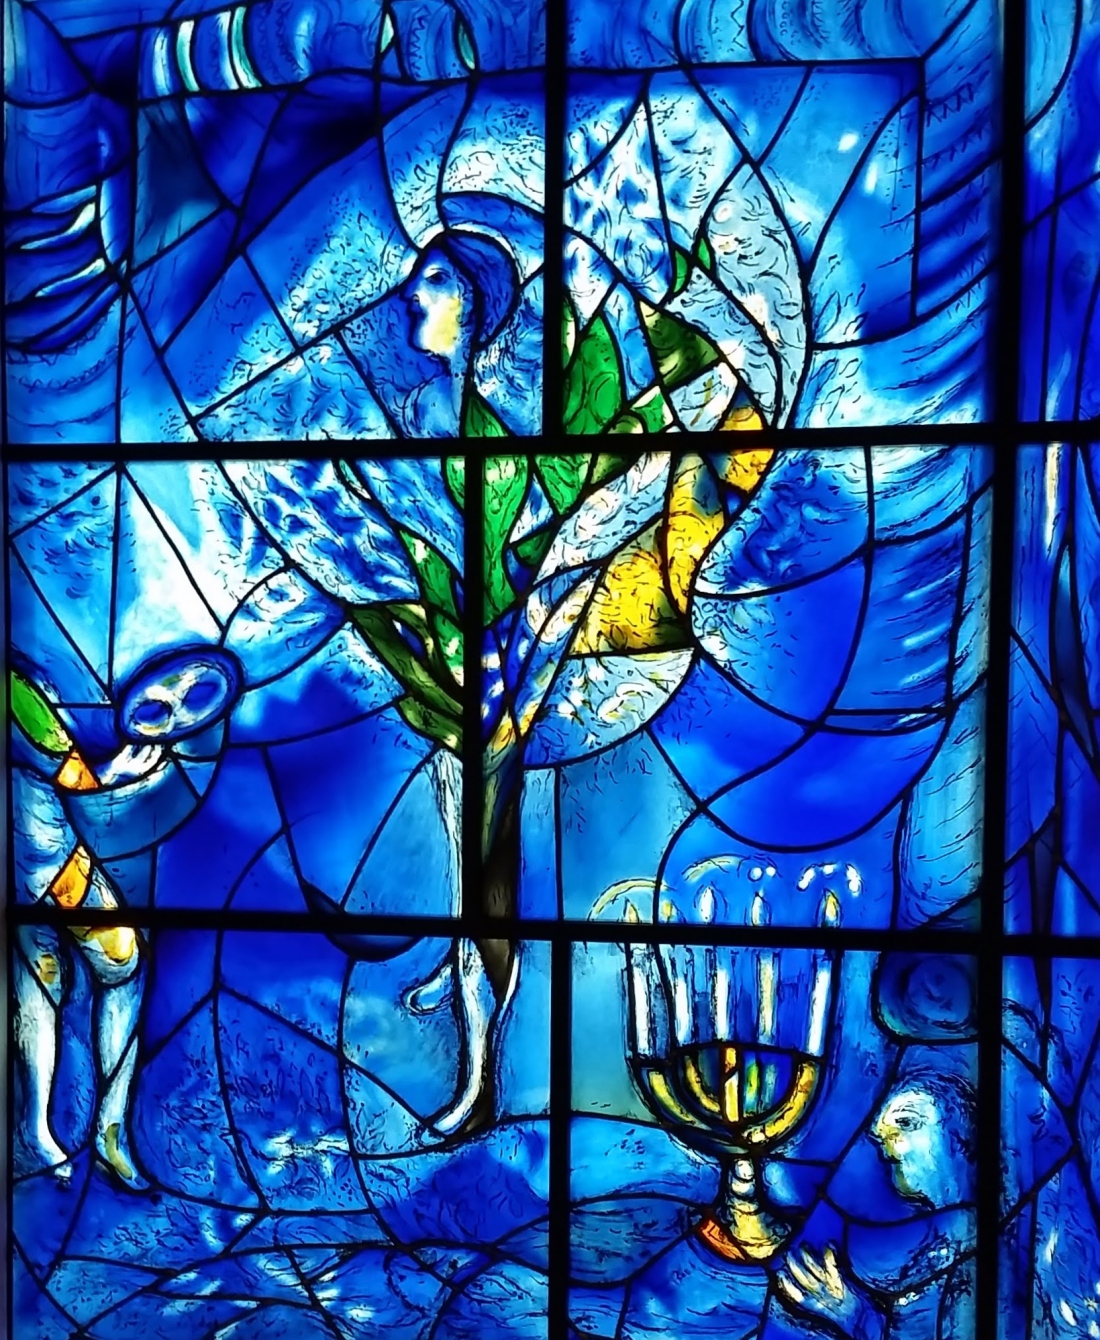 Visiting the Chagall Windows, The Art Institute of Chicago. Shot with a Samsung Galaxy S5